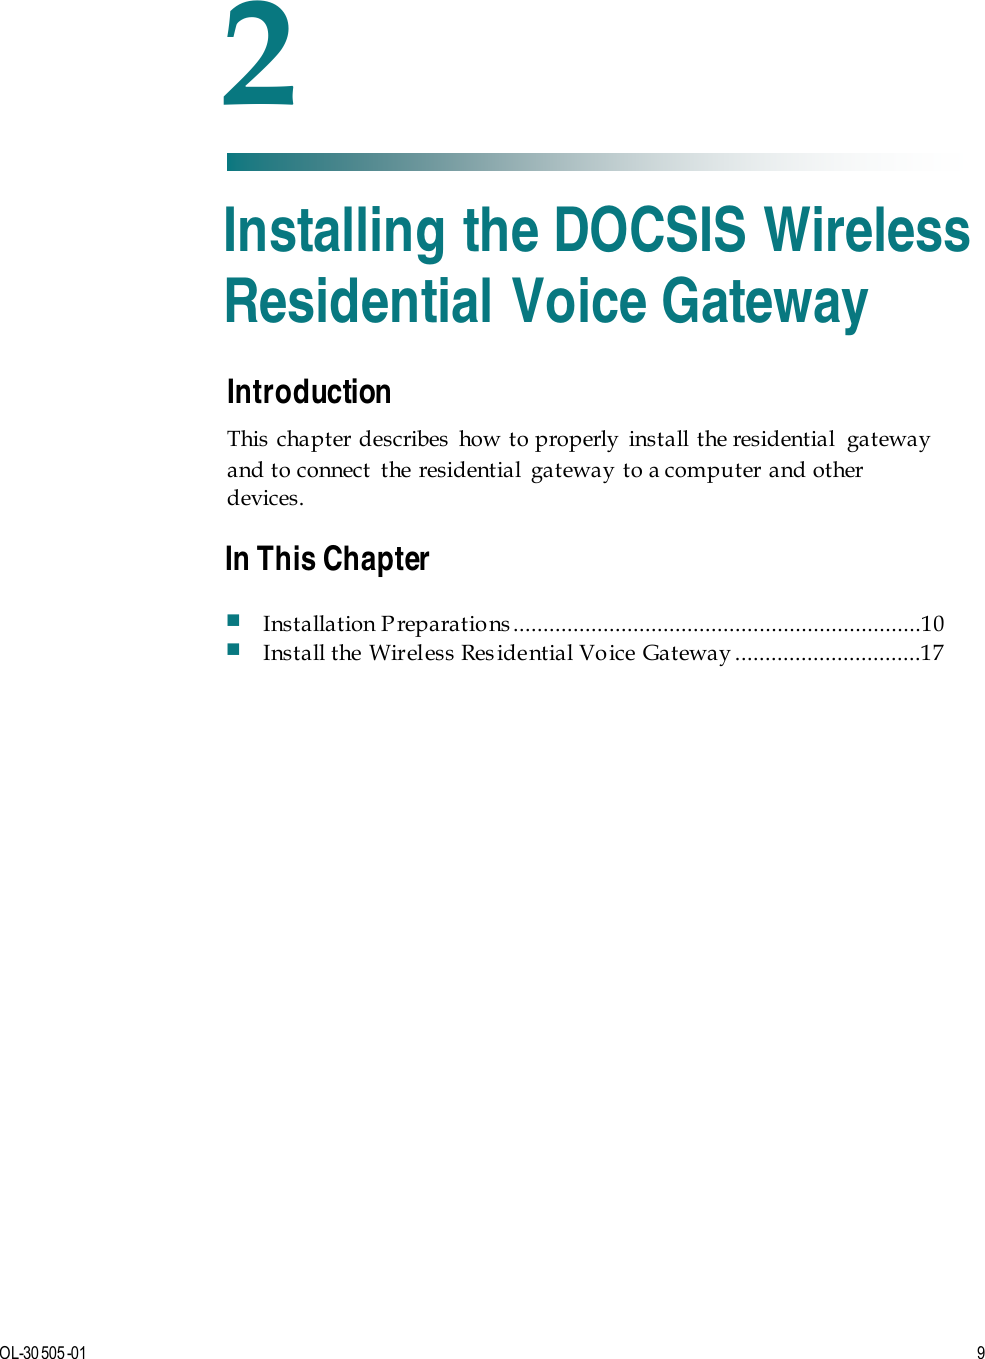   OL-30 505-01   9  Introduction This chapter describes how to properly install the residential  gateway and to connect the residential gateway to a computer and other devices.    2 Chapter 2 Installing the DOCSIS Wireless Residential Voice Gateway In This Chapter  Installation P reparations ....................................................................10  Install the Wireless Residential Voice Gateway ...............................17 